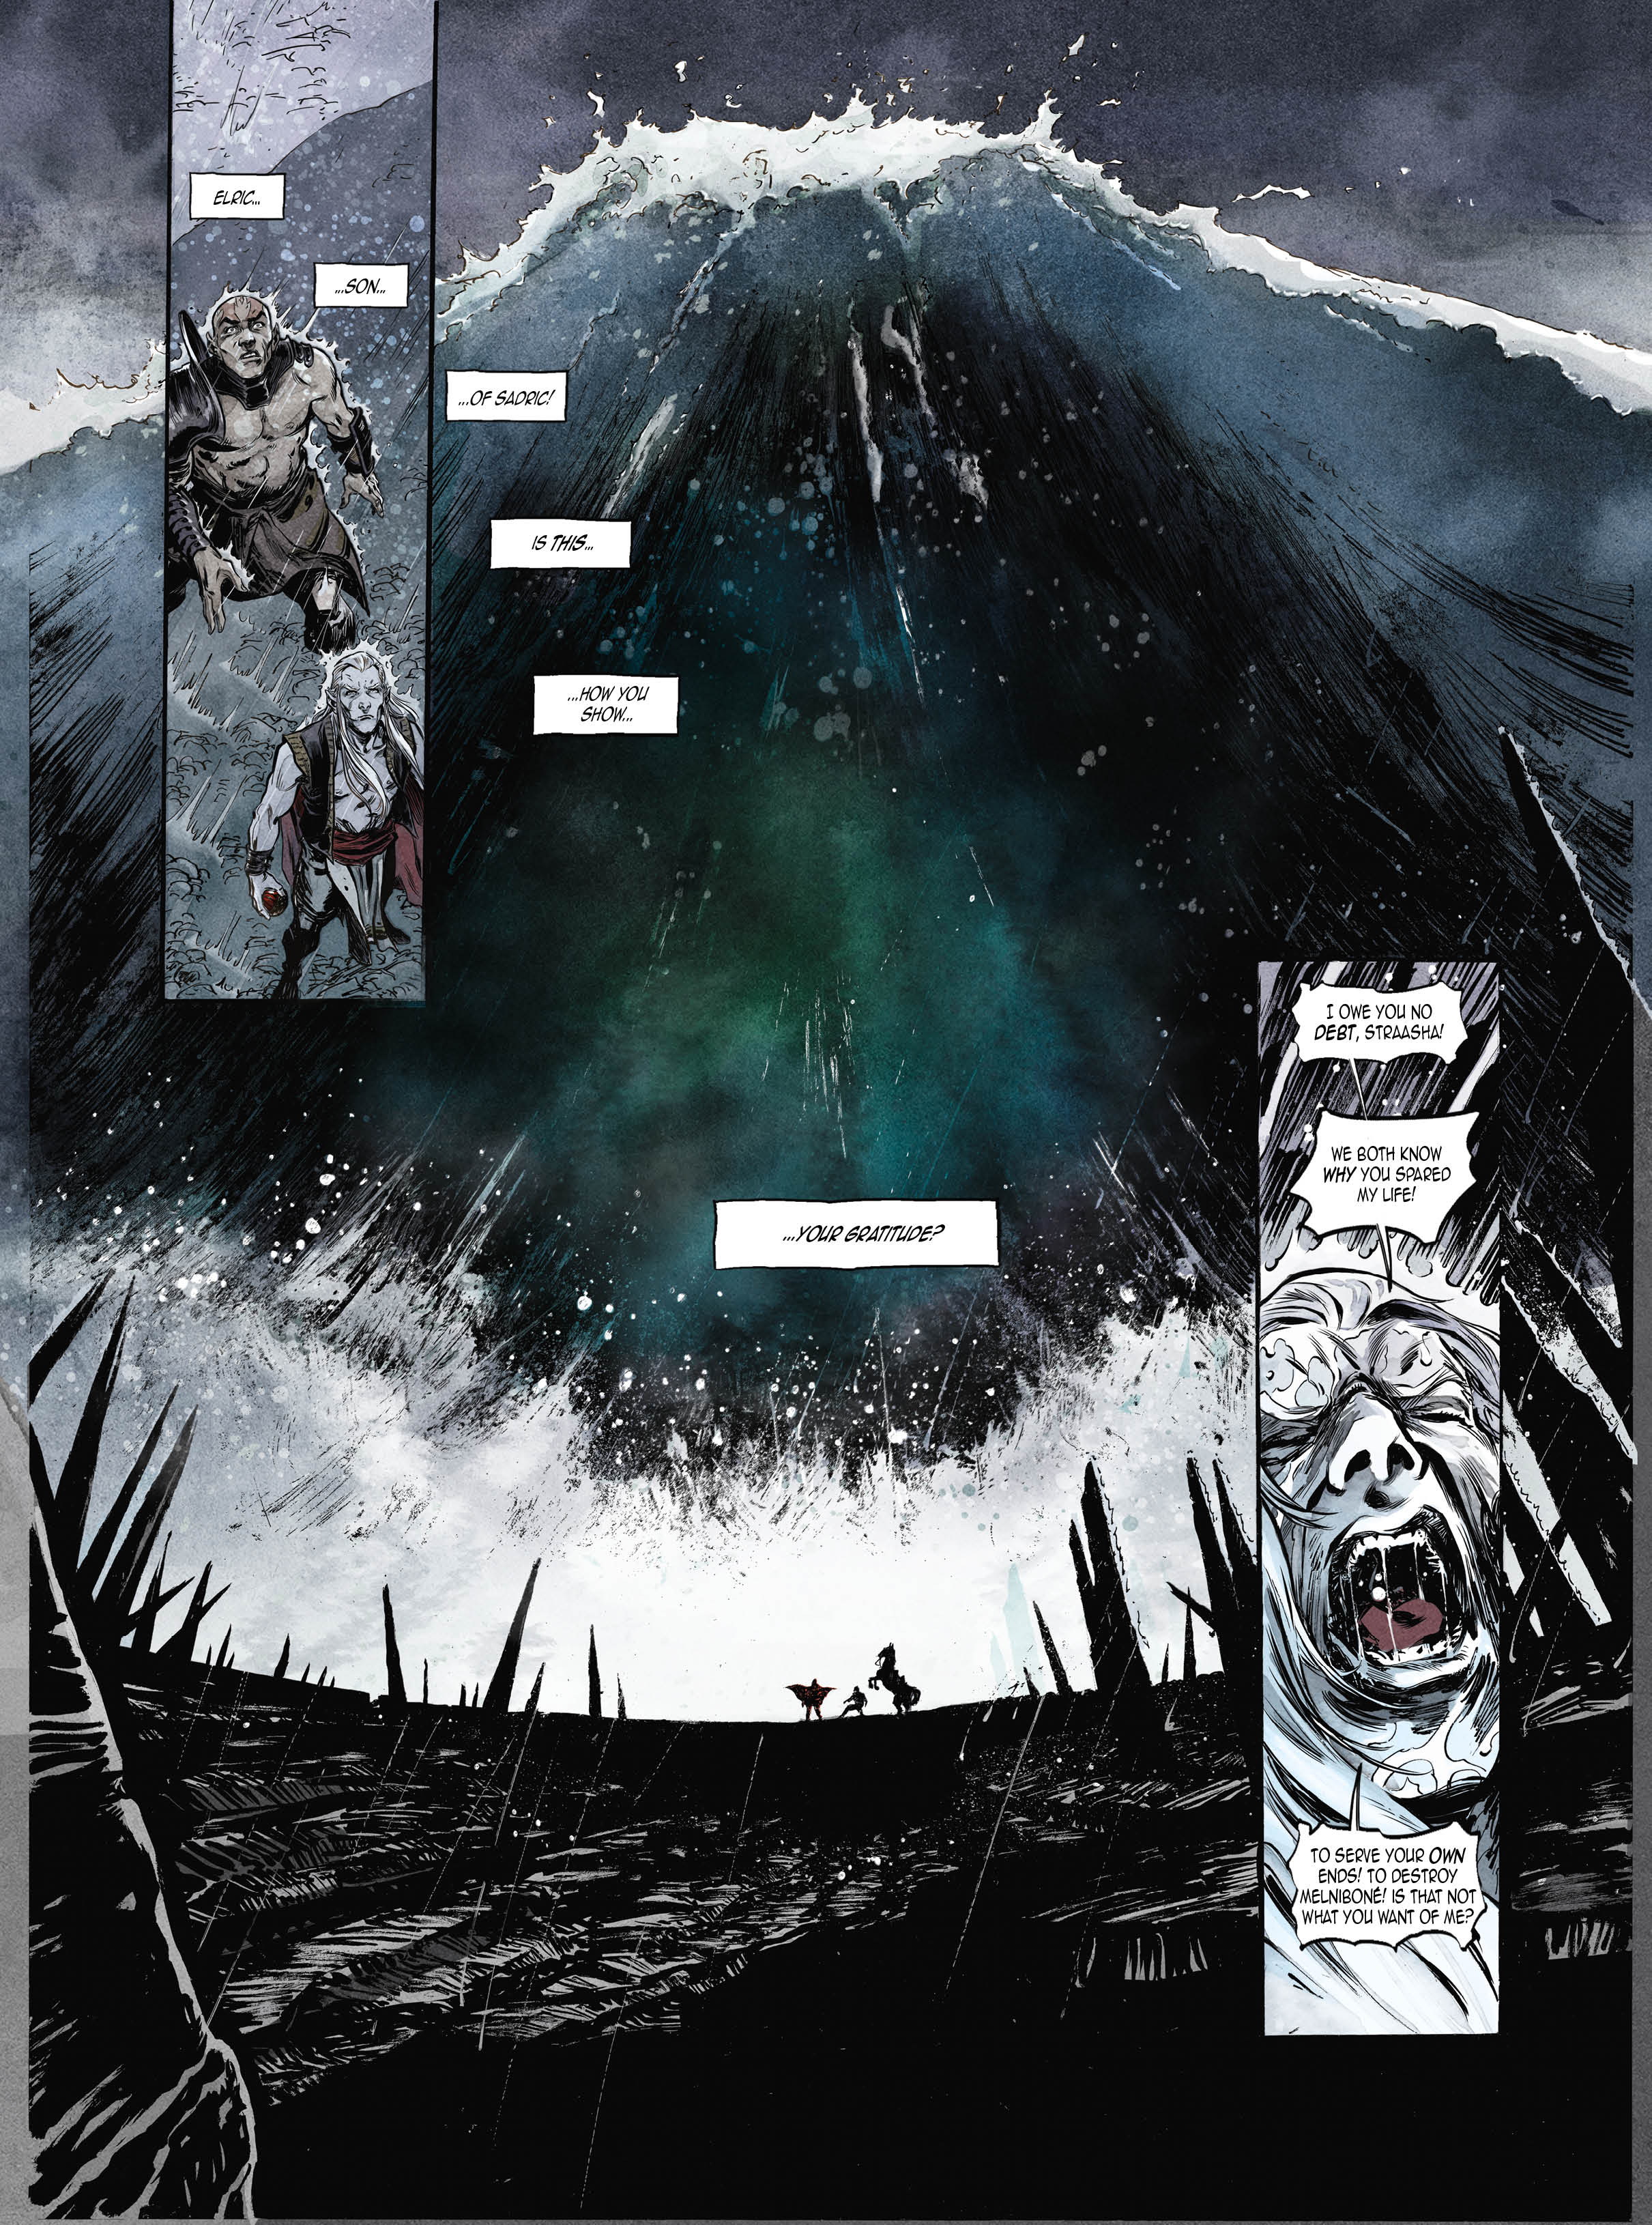 Elric Vol. 2 Preview1